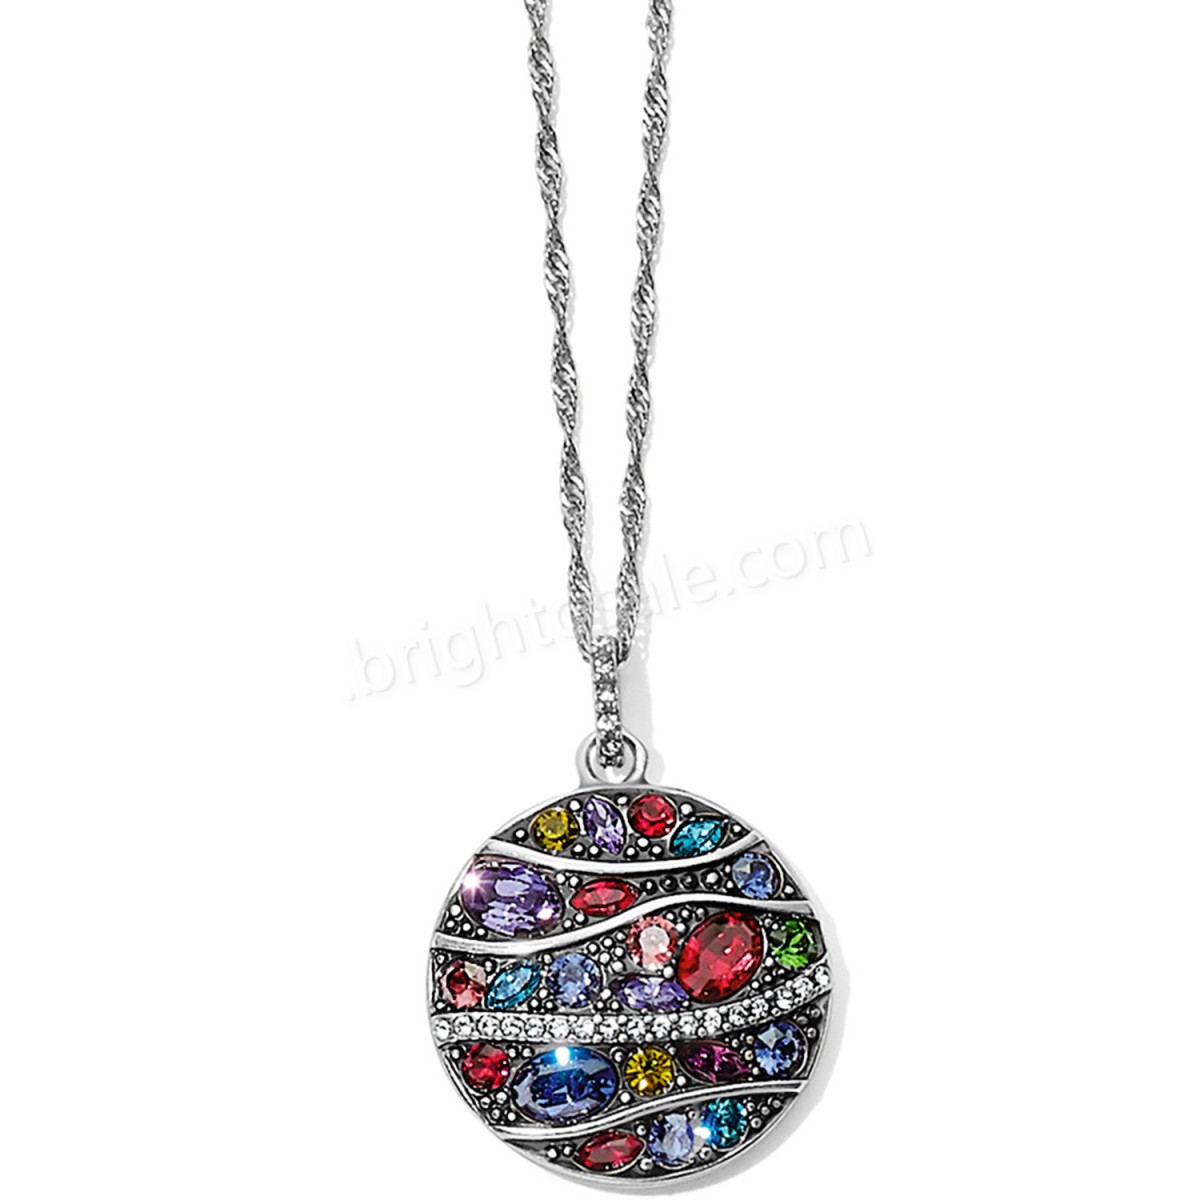 Brighton Collectibles & Online Discount Trust Your Journey Lady Bug Reversible Necklace - -0